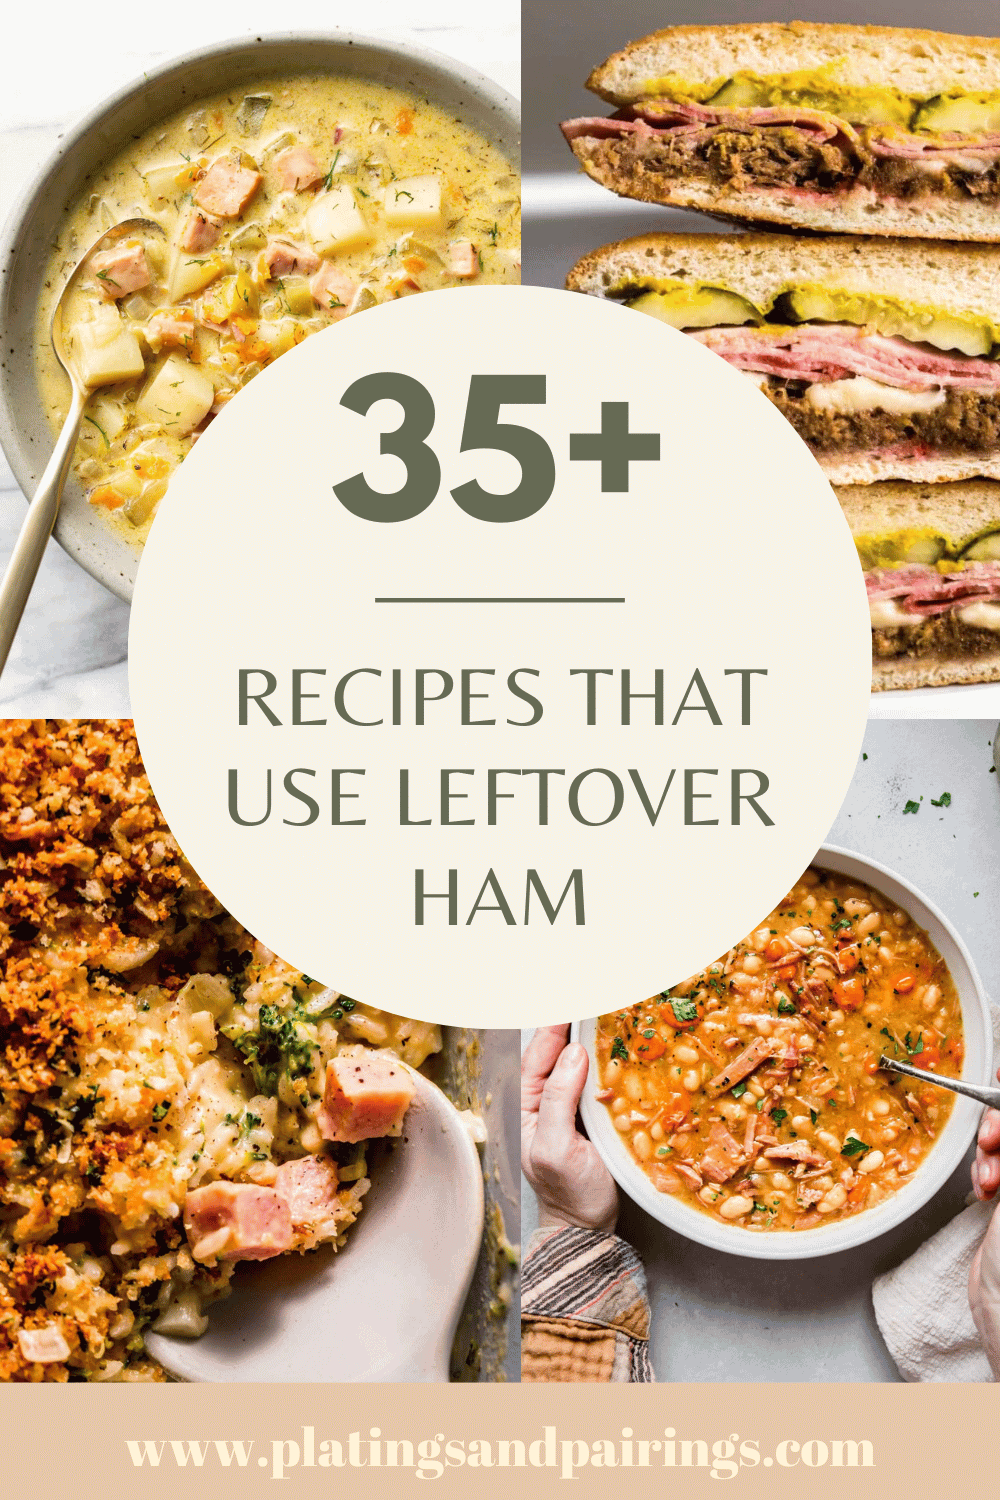 Collage of recipes that use leftover ham with text overlay.